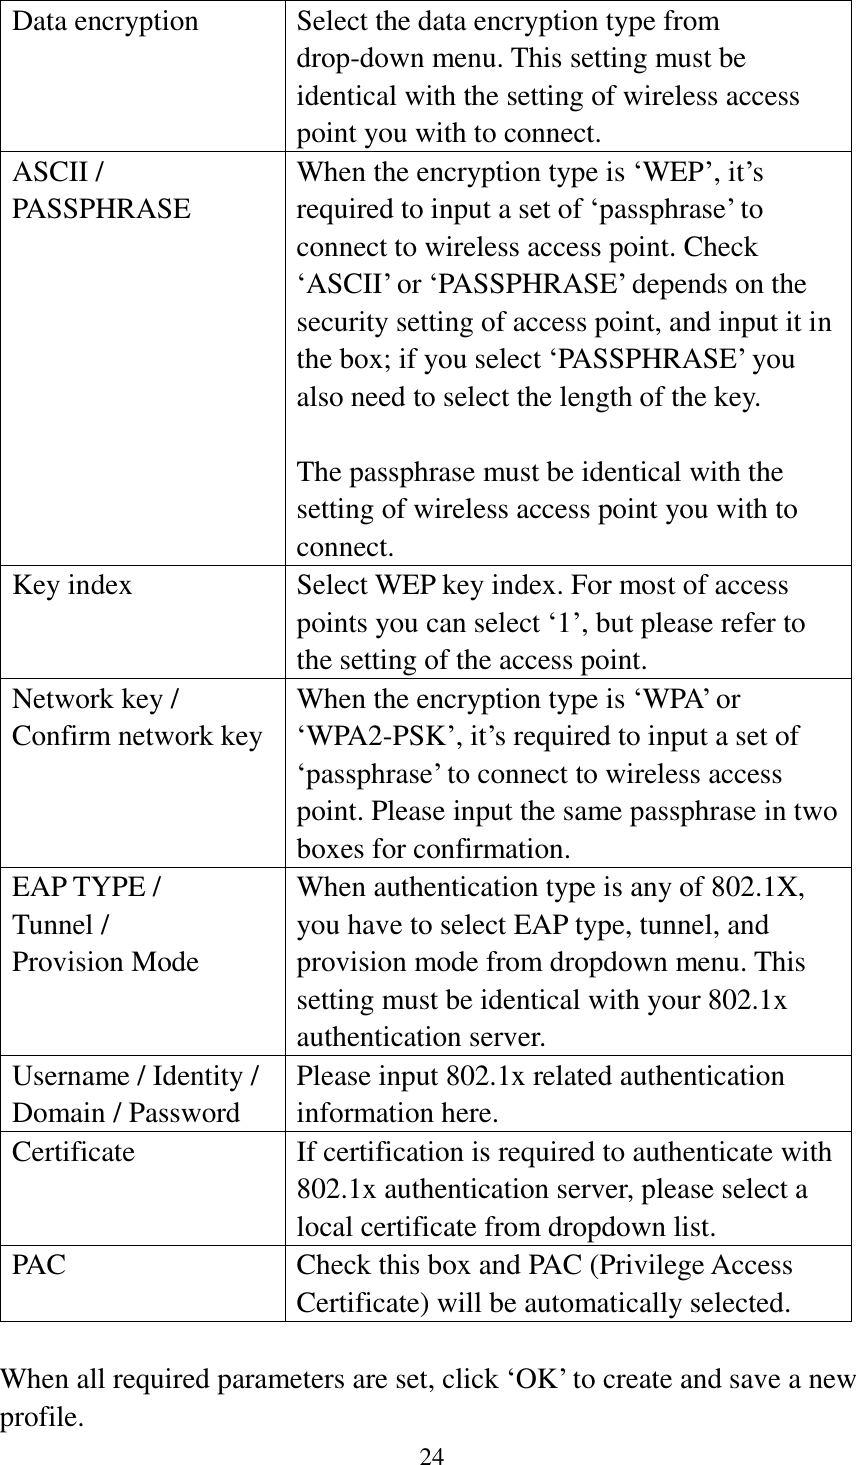 24  Data encryption Select the data encryption type from drop-down menu. This setting must be identical with the setting of wireless access point you with to connect. ASCII / PASSPHRASE When the encryption type is ‘WEP’, it’s required to input a set of ‘passphrase’ to connect to wireless access point. Check ‘ASCII’ or ‘PASSPHRASE’ depends on the security setting of access point, and input it in the box; if you select ‘PASSPHRASE’ you also need to select the length of the key.  The passphrase must be identical with the setting of wireless access point you with to connect. Key index Select WEP key index. For most of access points you can select ‘1’, but please refer to the setting of the access point. Network key / Confirm network key When the encryption type is ‘WPA’ or ‘WPA2-PSK’, it’s required to input a set of ‘passphrase’ to connect to wireless access point. Please input the same passphrase in two boxes for confirmation. EAP TYPE / Tunnel / Provision Mode When authentication type is any of 802.1X, you have to select EAP type, tunnel, and provision mode from dropdown menu. This setting must be identical with your 802.1x authentication server. Username / Identity / Domain / Password Please input 802.1x related authentication information here.   Certificate If certification is required to authenticate with 802.1x authentication server, please select a local certificate from dropdown list. PAC Check this box and PAC (Privilege Access Certificate) will be automatically selected.  When all required parameters are set, click ‘OK’ to create and save a new profile. 